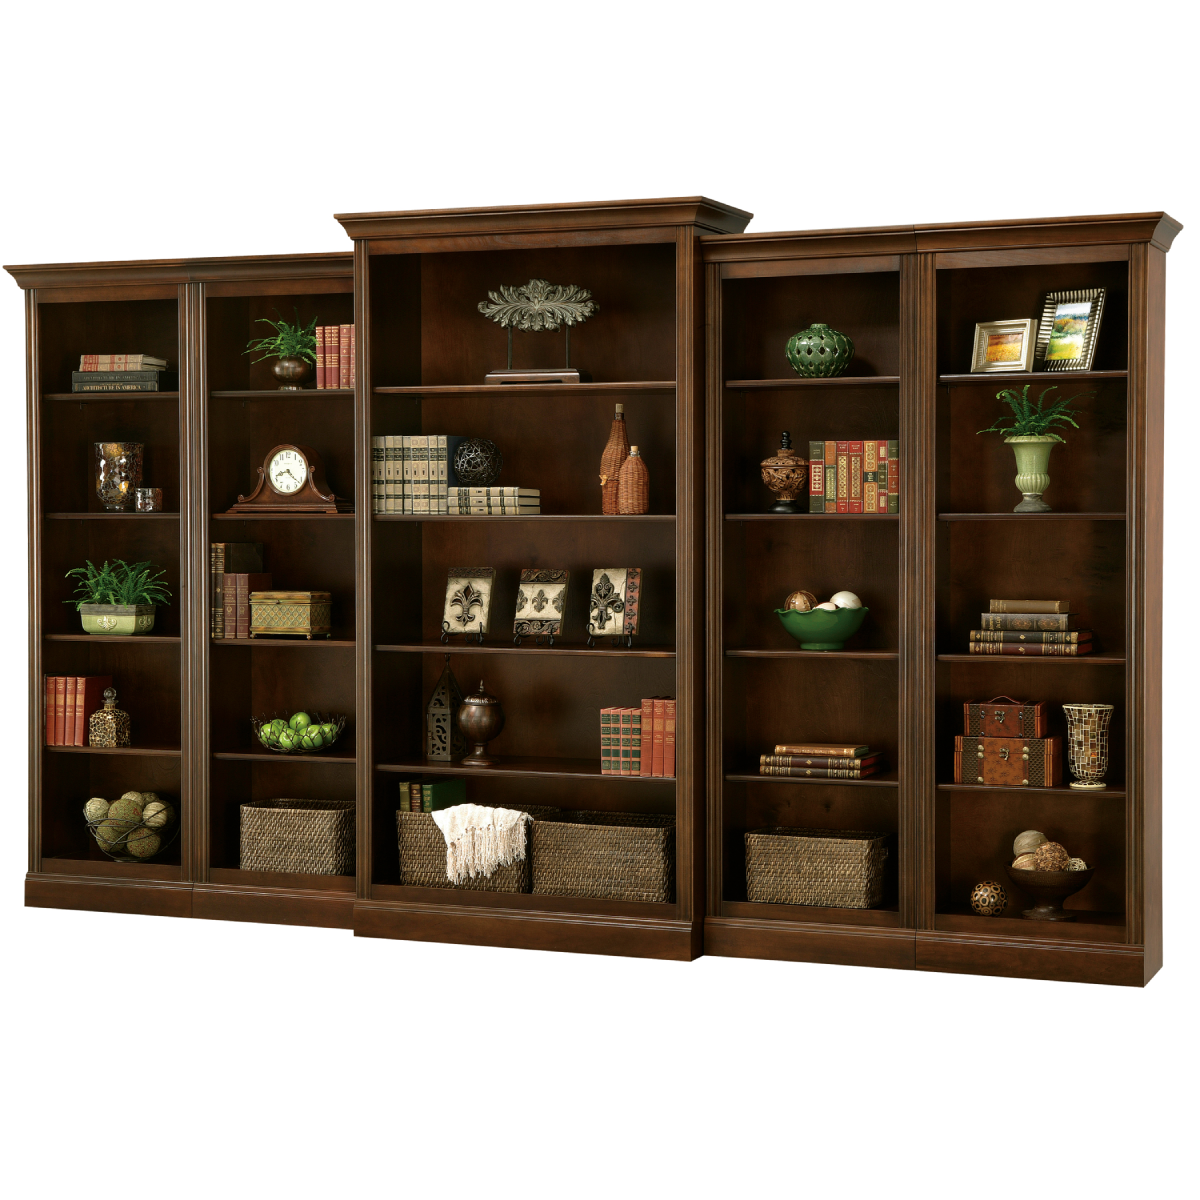 Howard Miller Bunching Bookcase 920005 - Home Bars USA